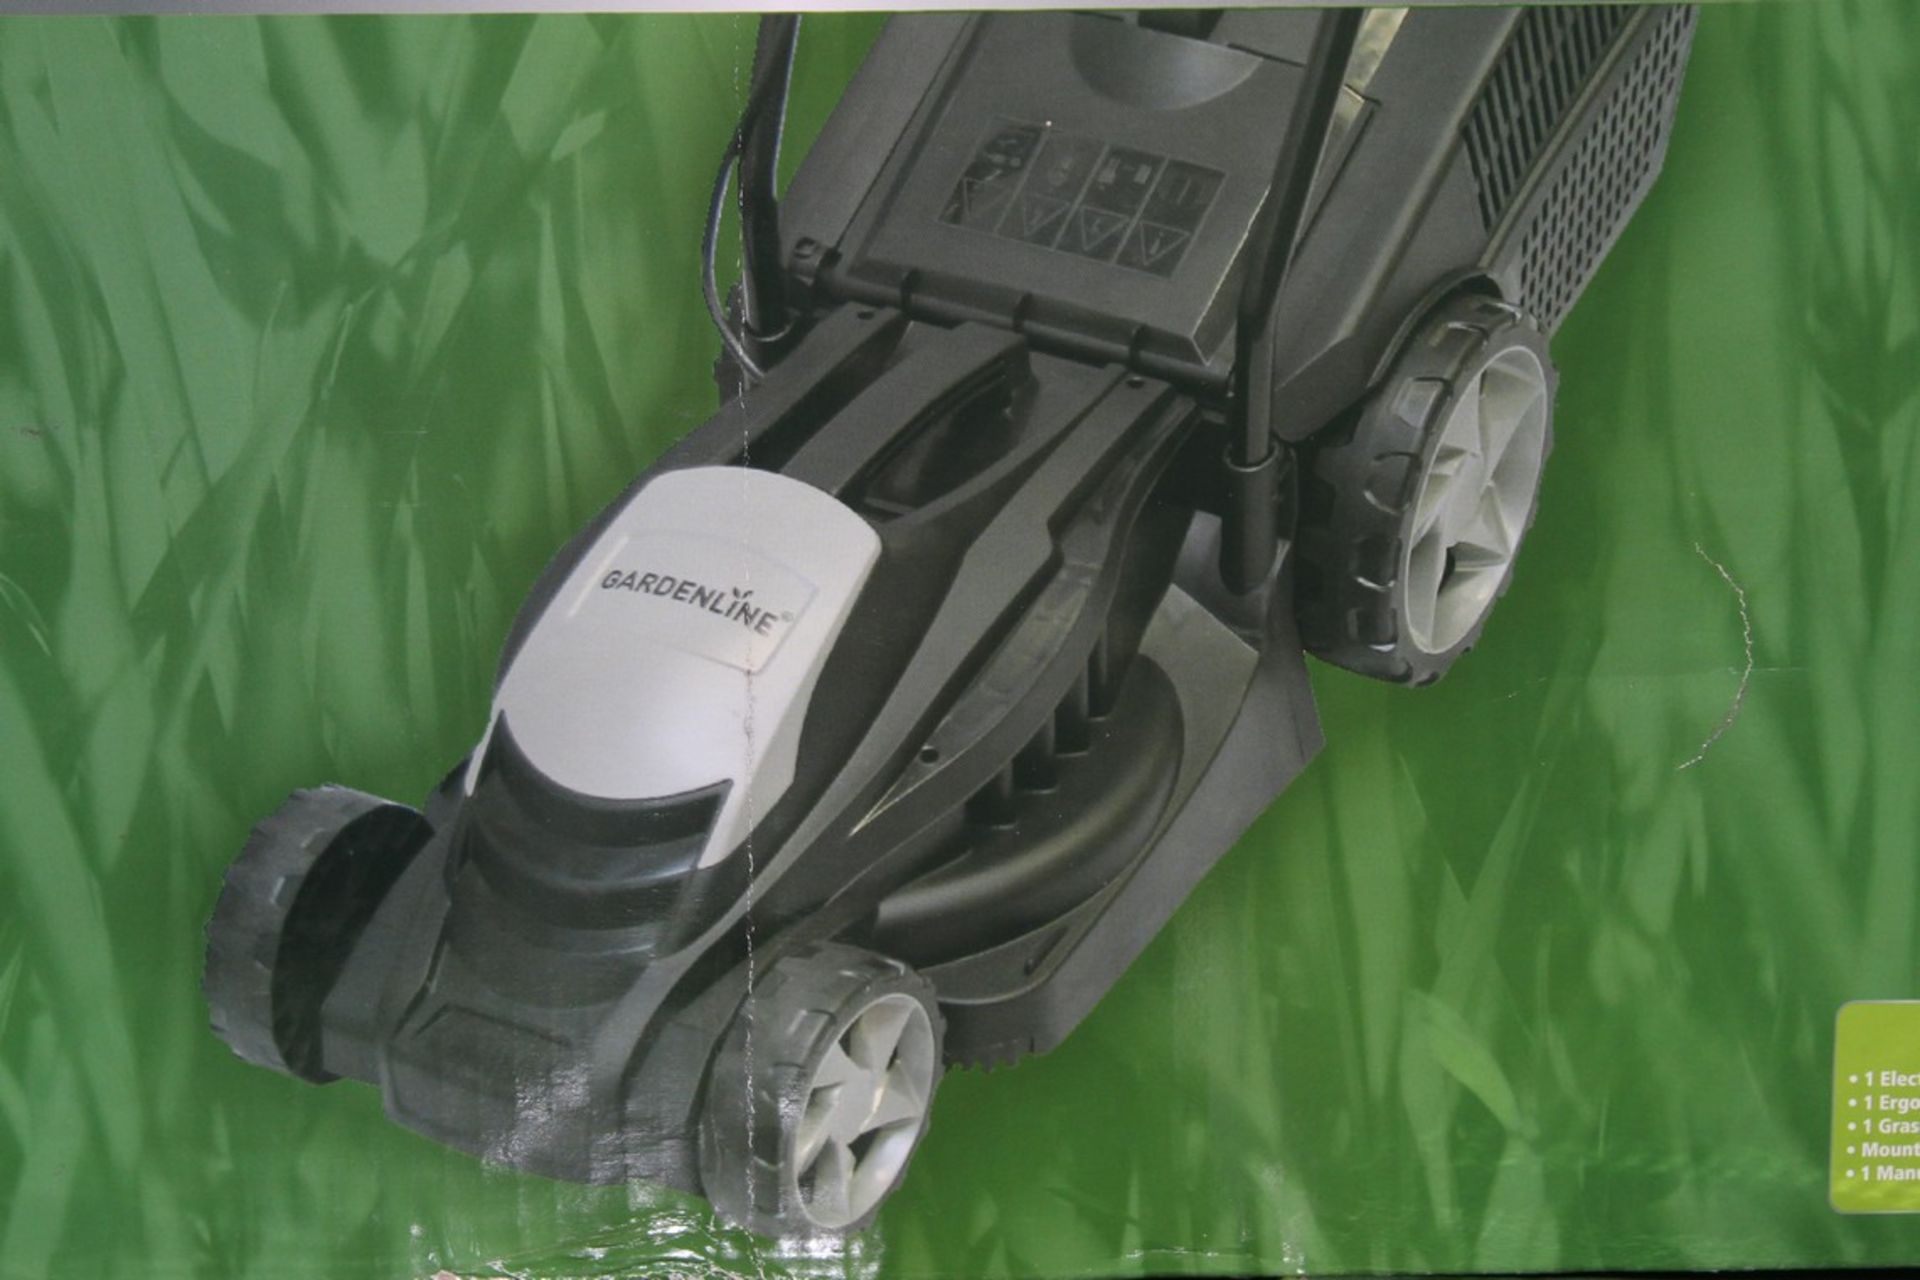 Boxed Gardenline 1100W Electric Lawn Mower RRP £40 (Public Viewing and Appraisals Available)